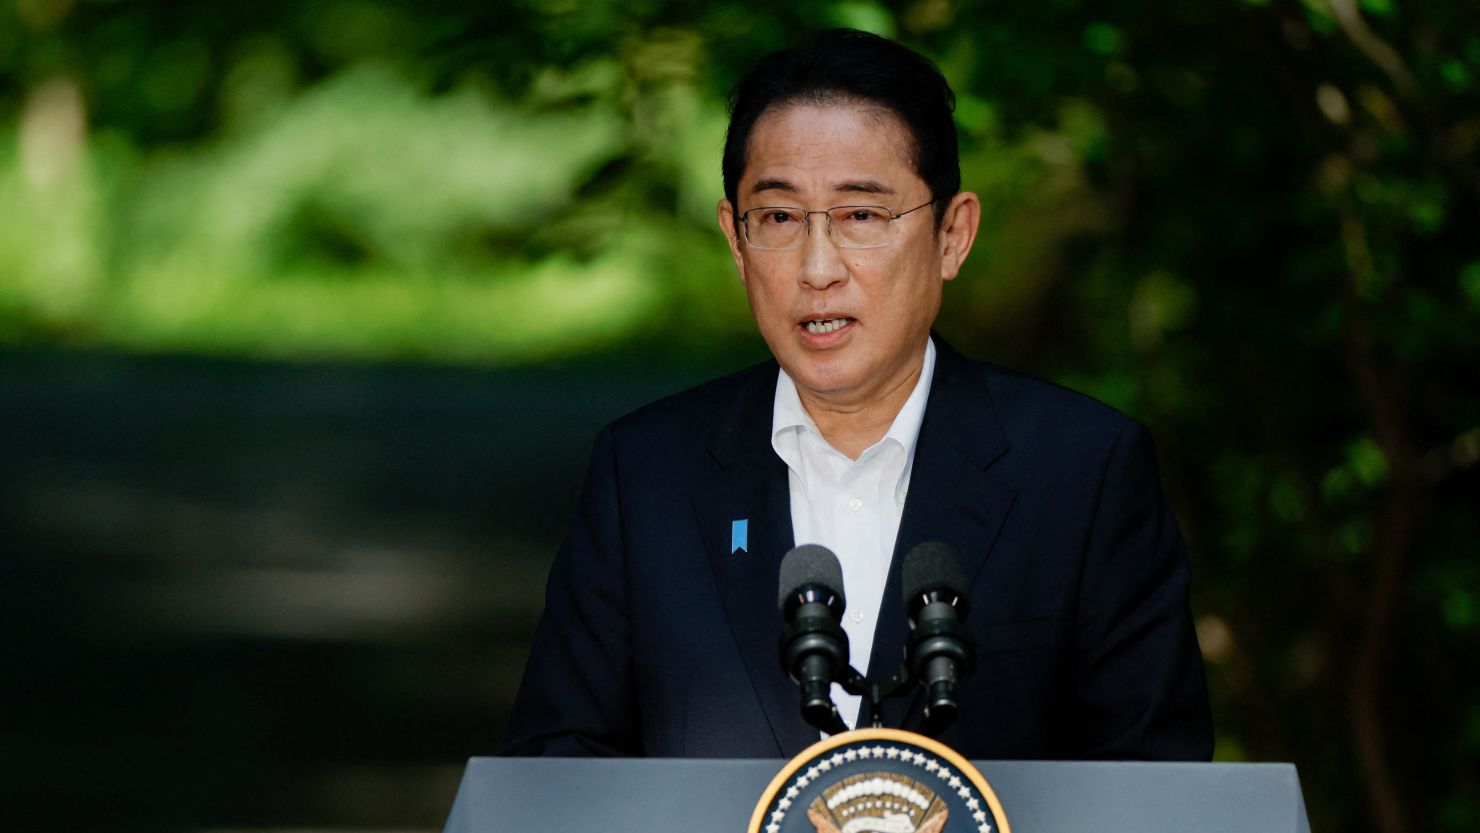 Japanese Prime Minister Fumio Kishida speaks at a joint press conference with US President Joe Biden and South Korean President Yoon Suk Yeol during the trilateral summit at Camp David on August 18.